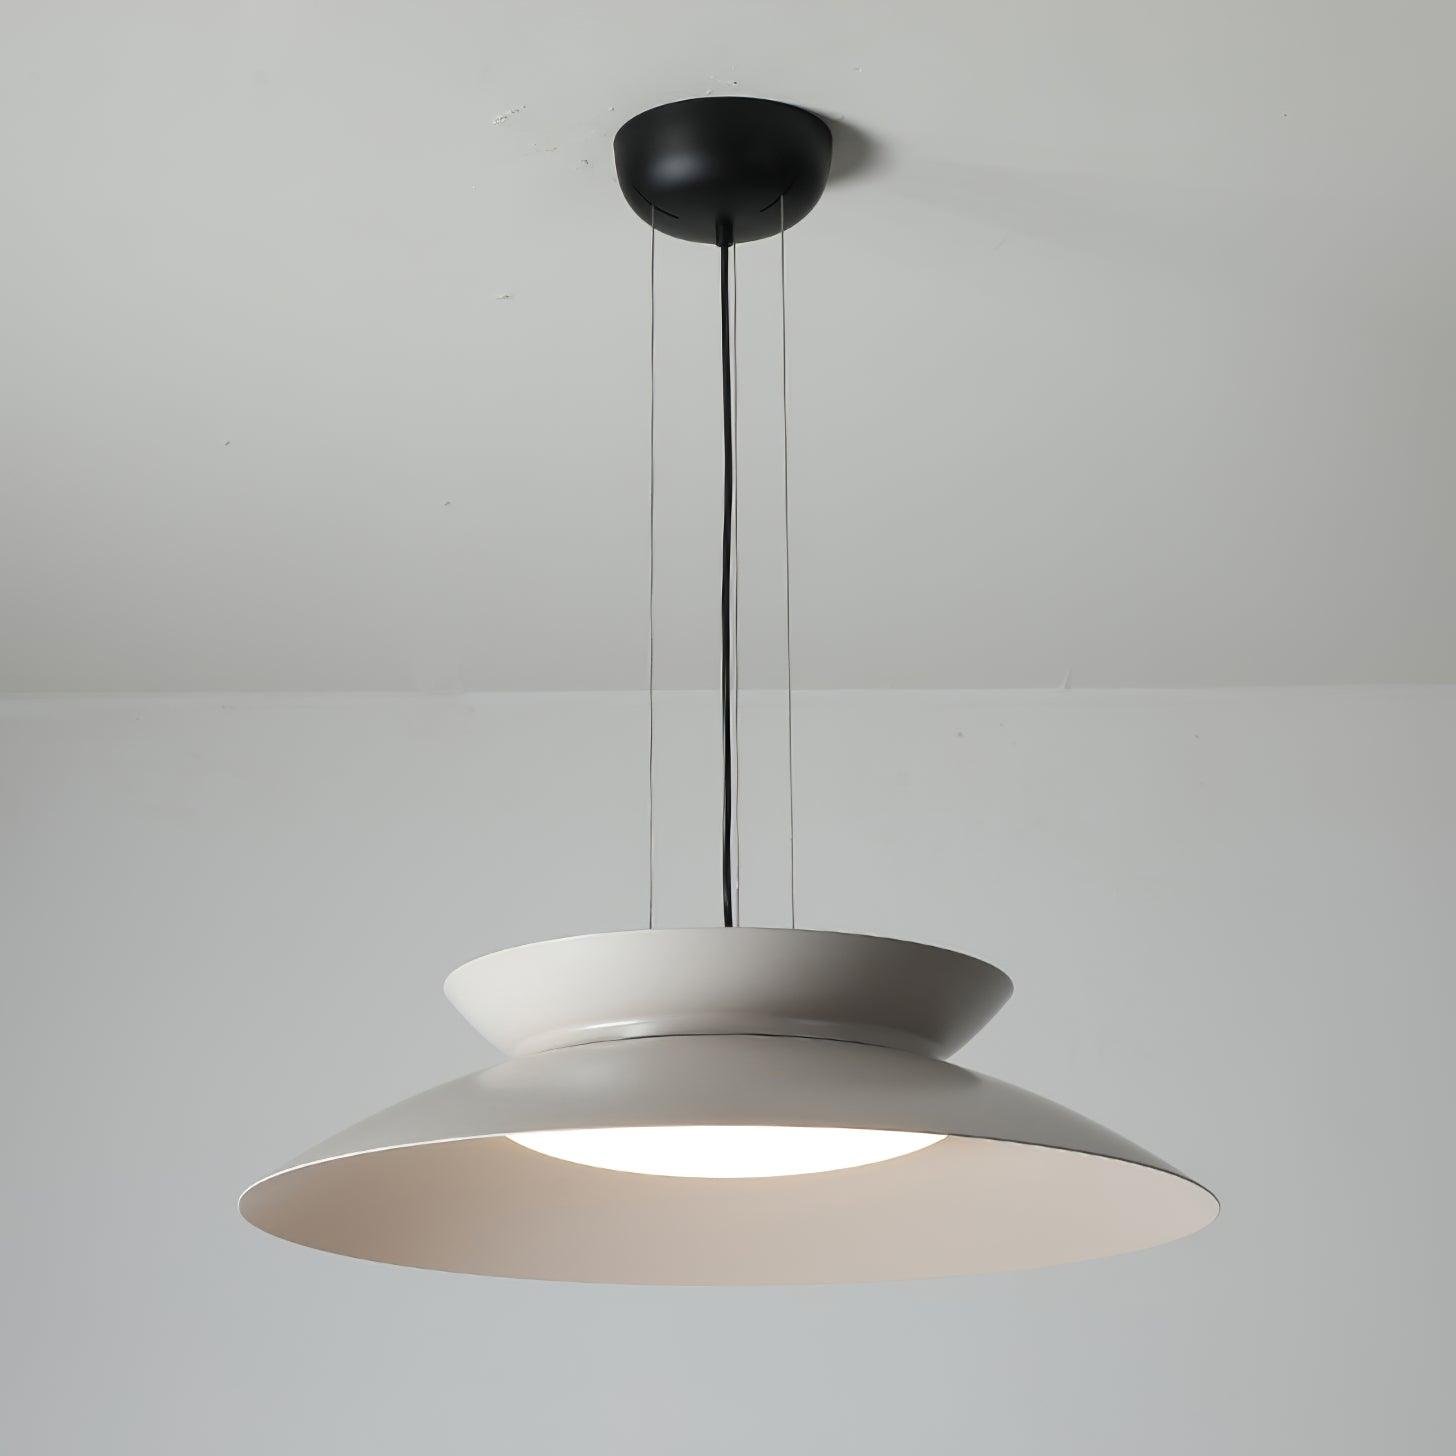 Cetra Pendant Light in White Gray with Cool Light, Diameter 26.8" x Height 6.5" (68cm x 16.5cm)